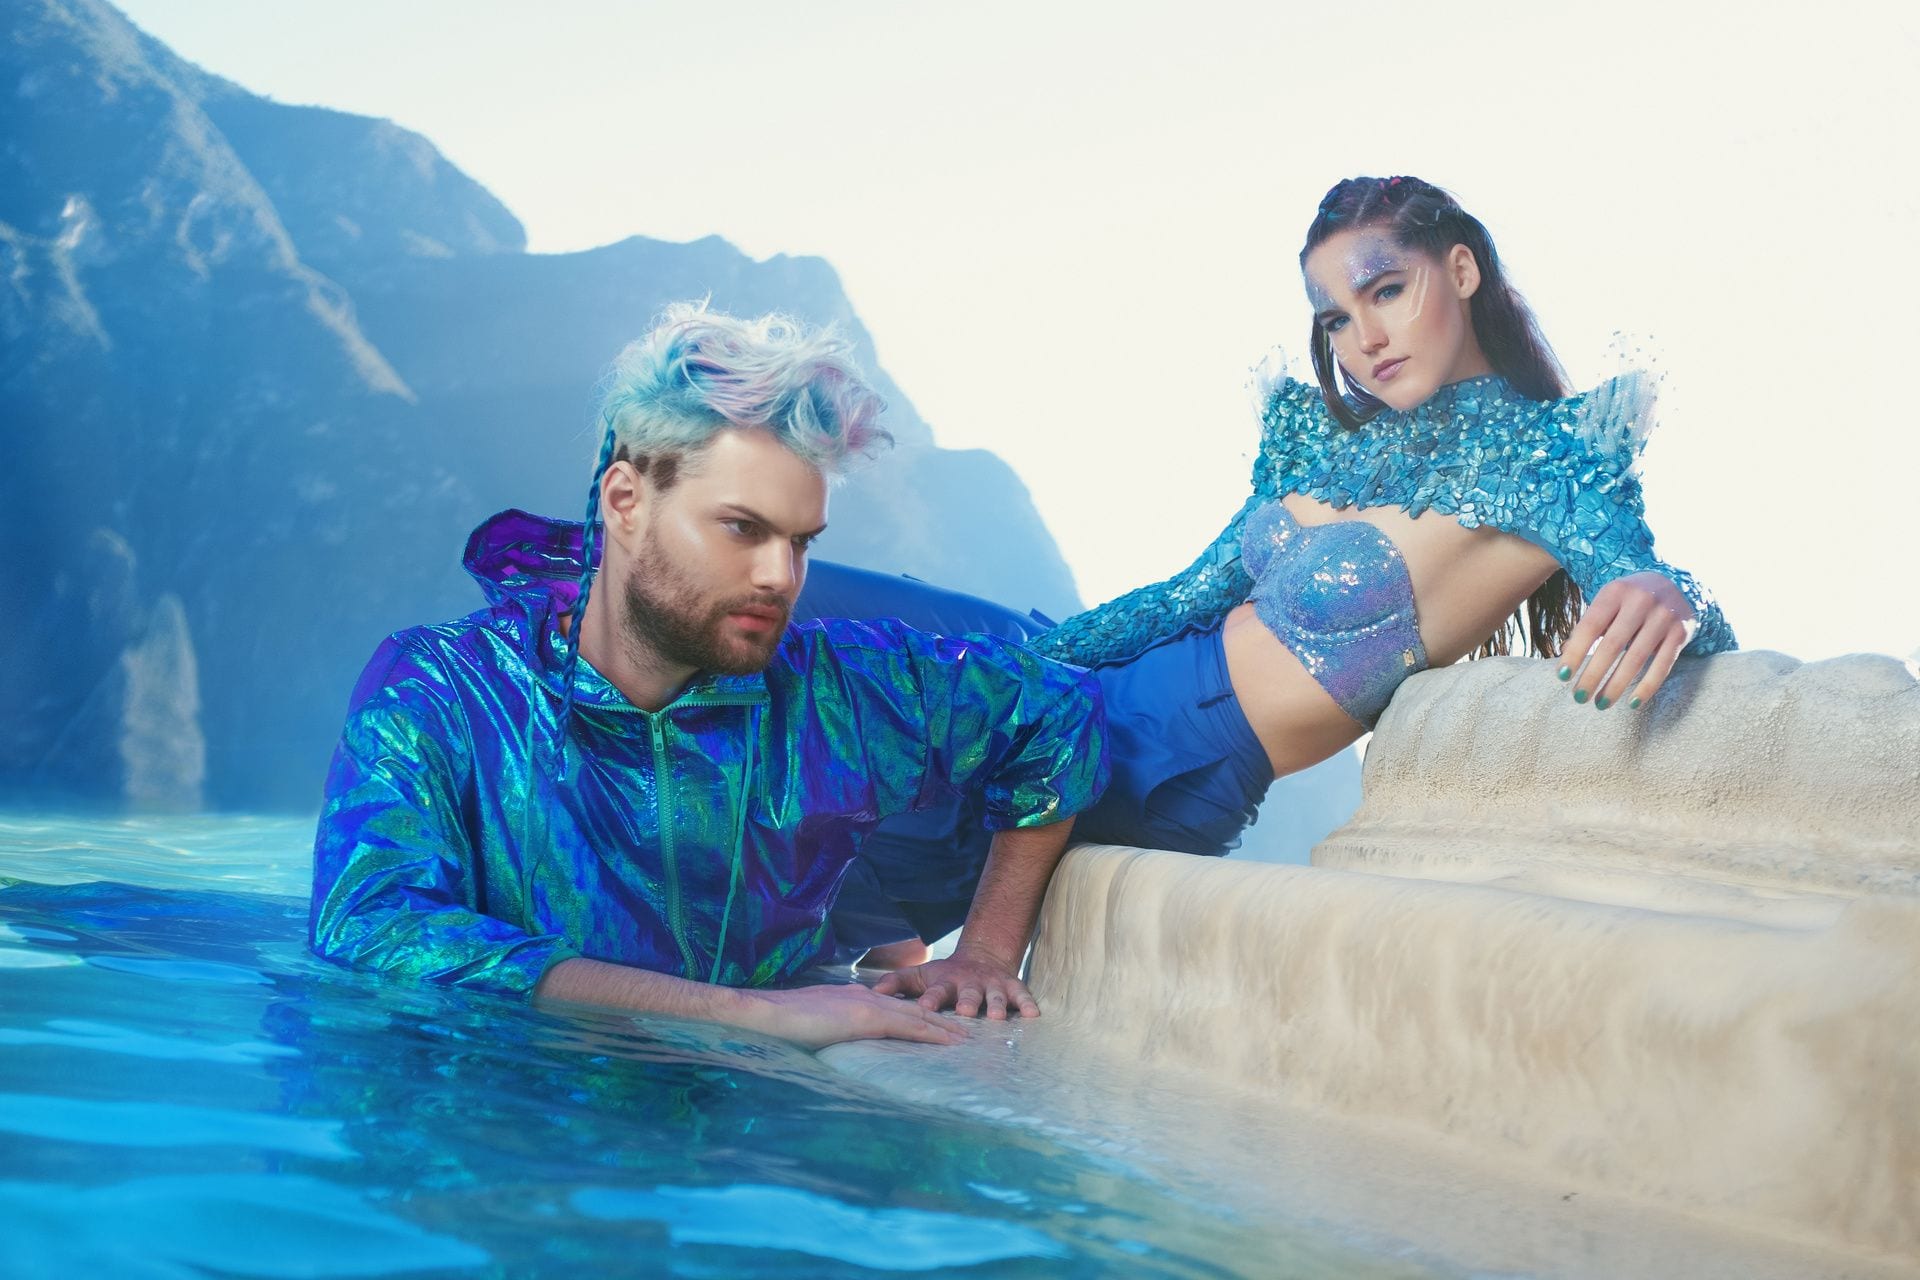 How a Foot Injury Led to Sofi Tukker’s Latest EP